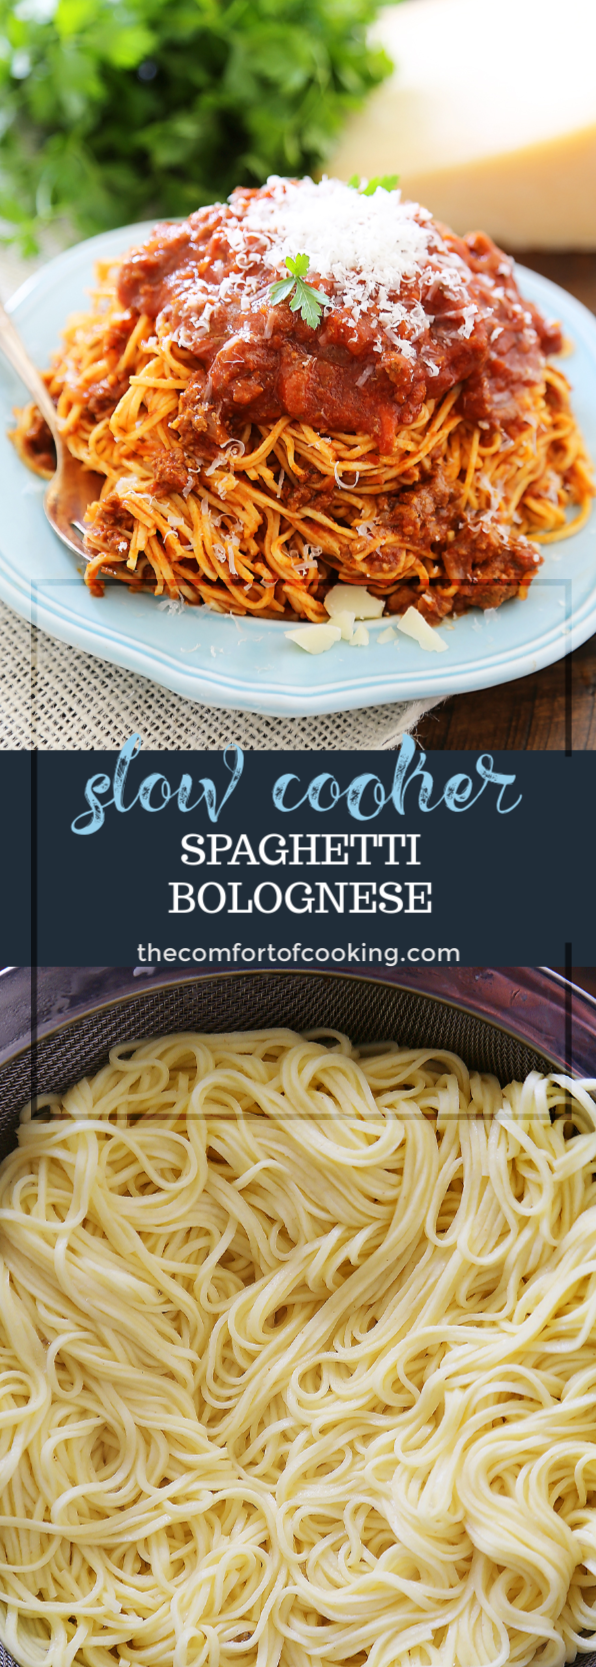 Slow Cooker Spaghetti Bolognese – The Comfort of Cooking